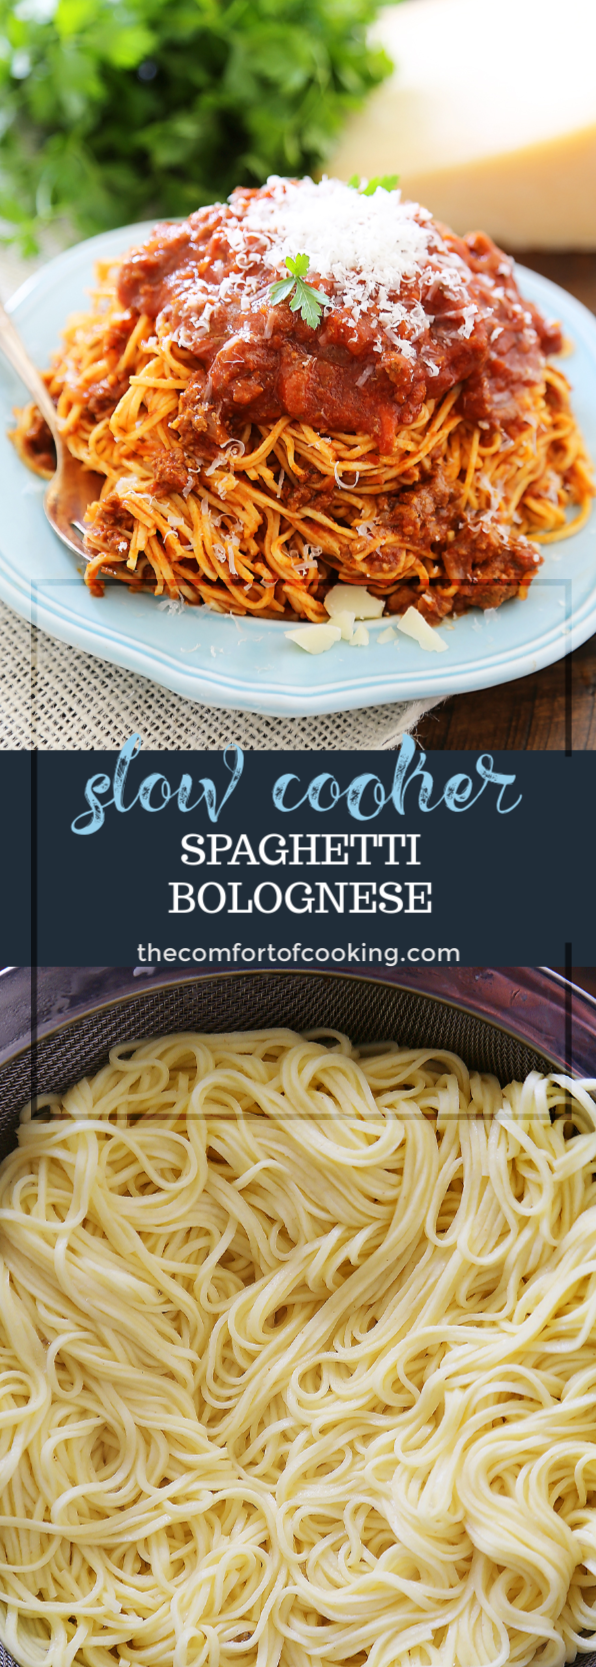 Slow Cooker Spaghetti Bolognese – The Comfort of Cooking